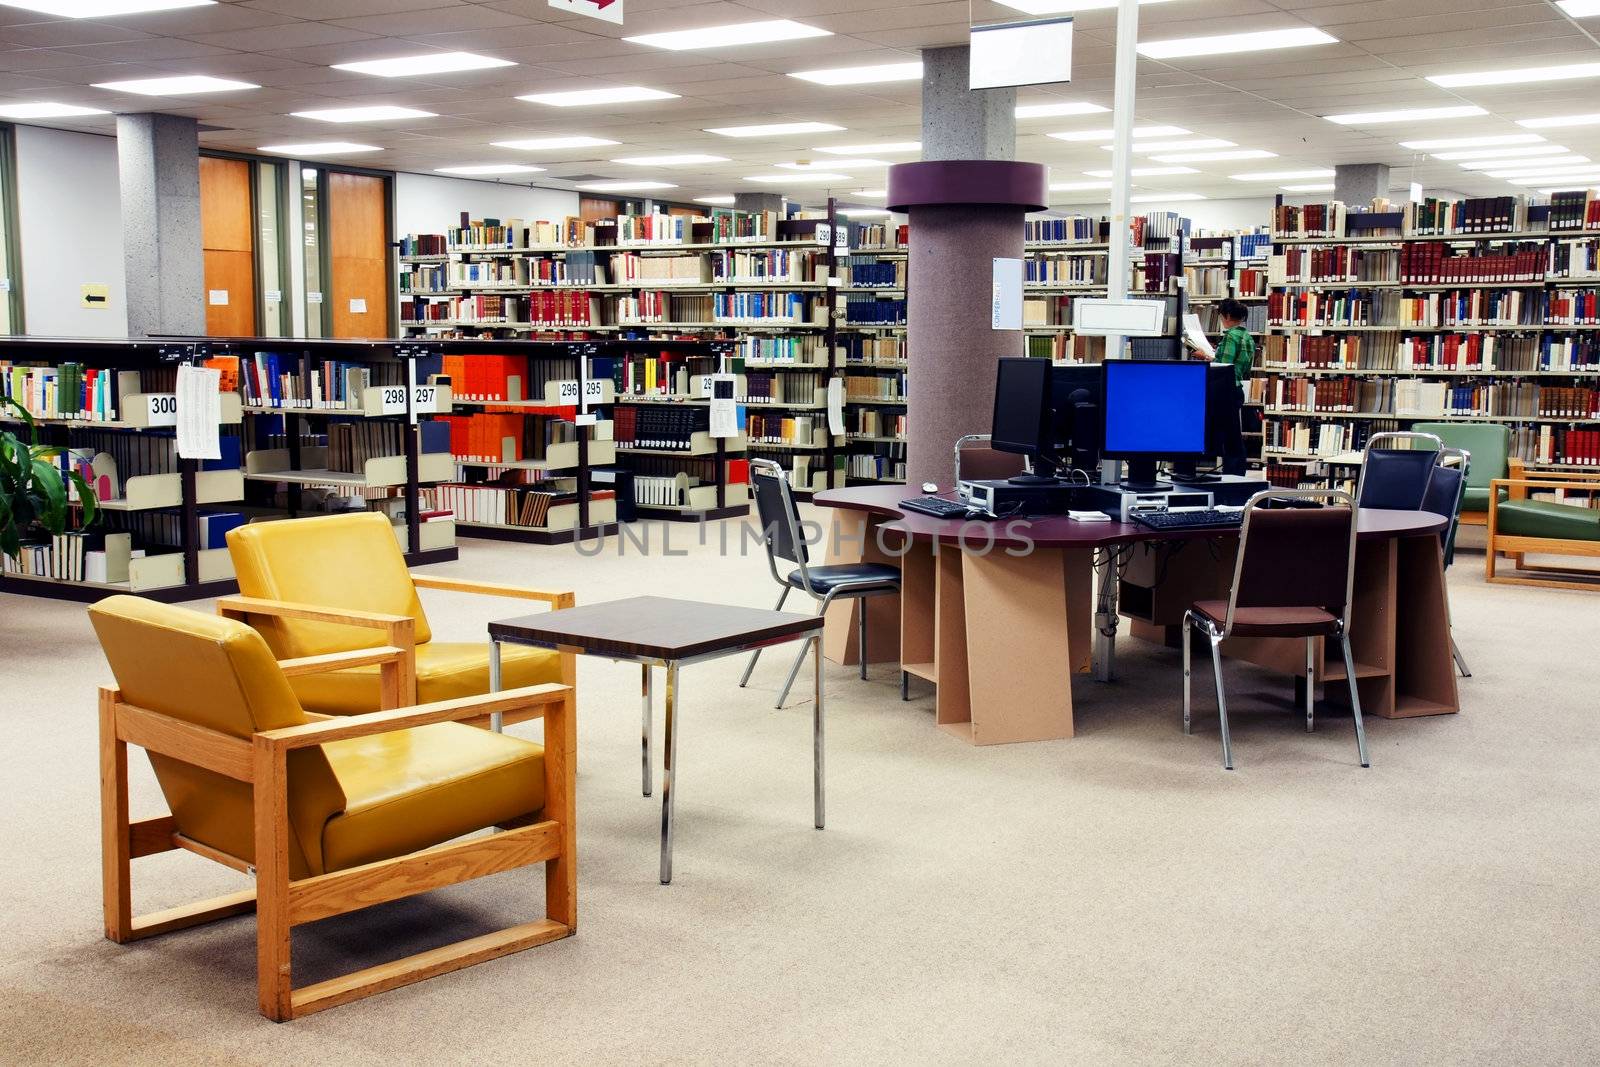 Computer station at the university college library with seating area in the foreground. One young female student searching far in the background.